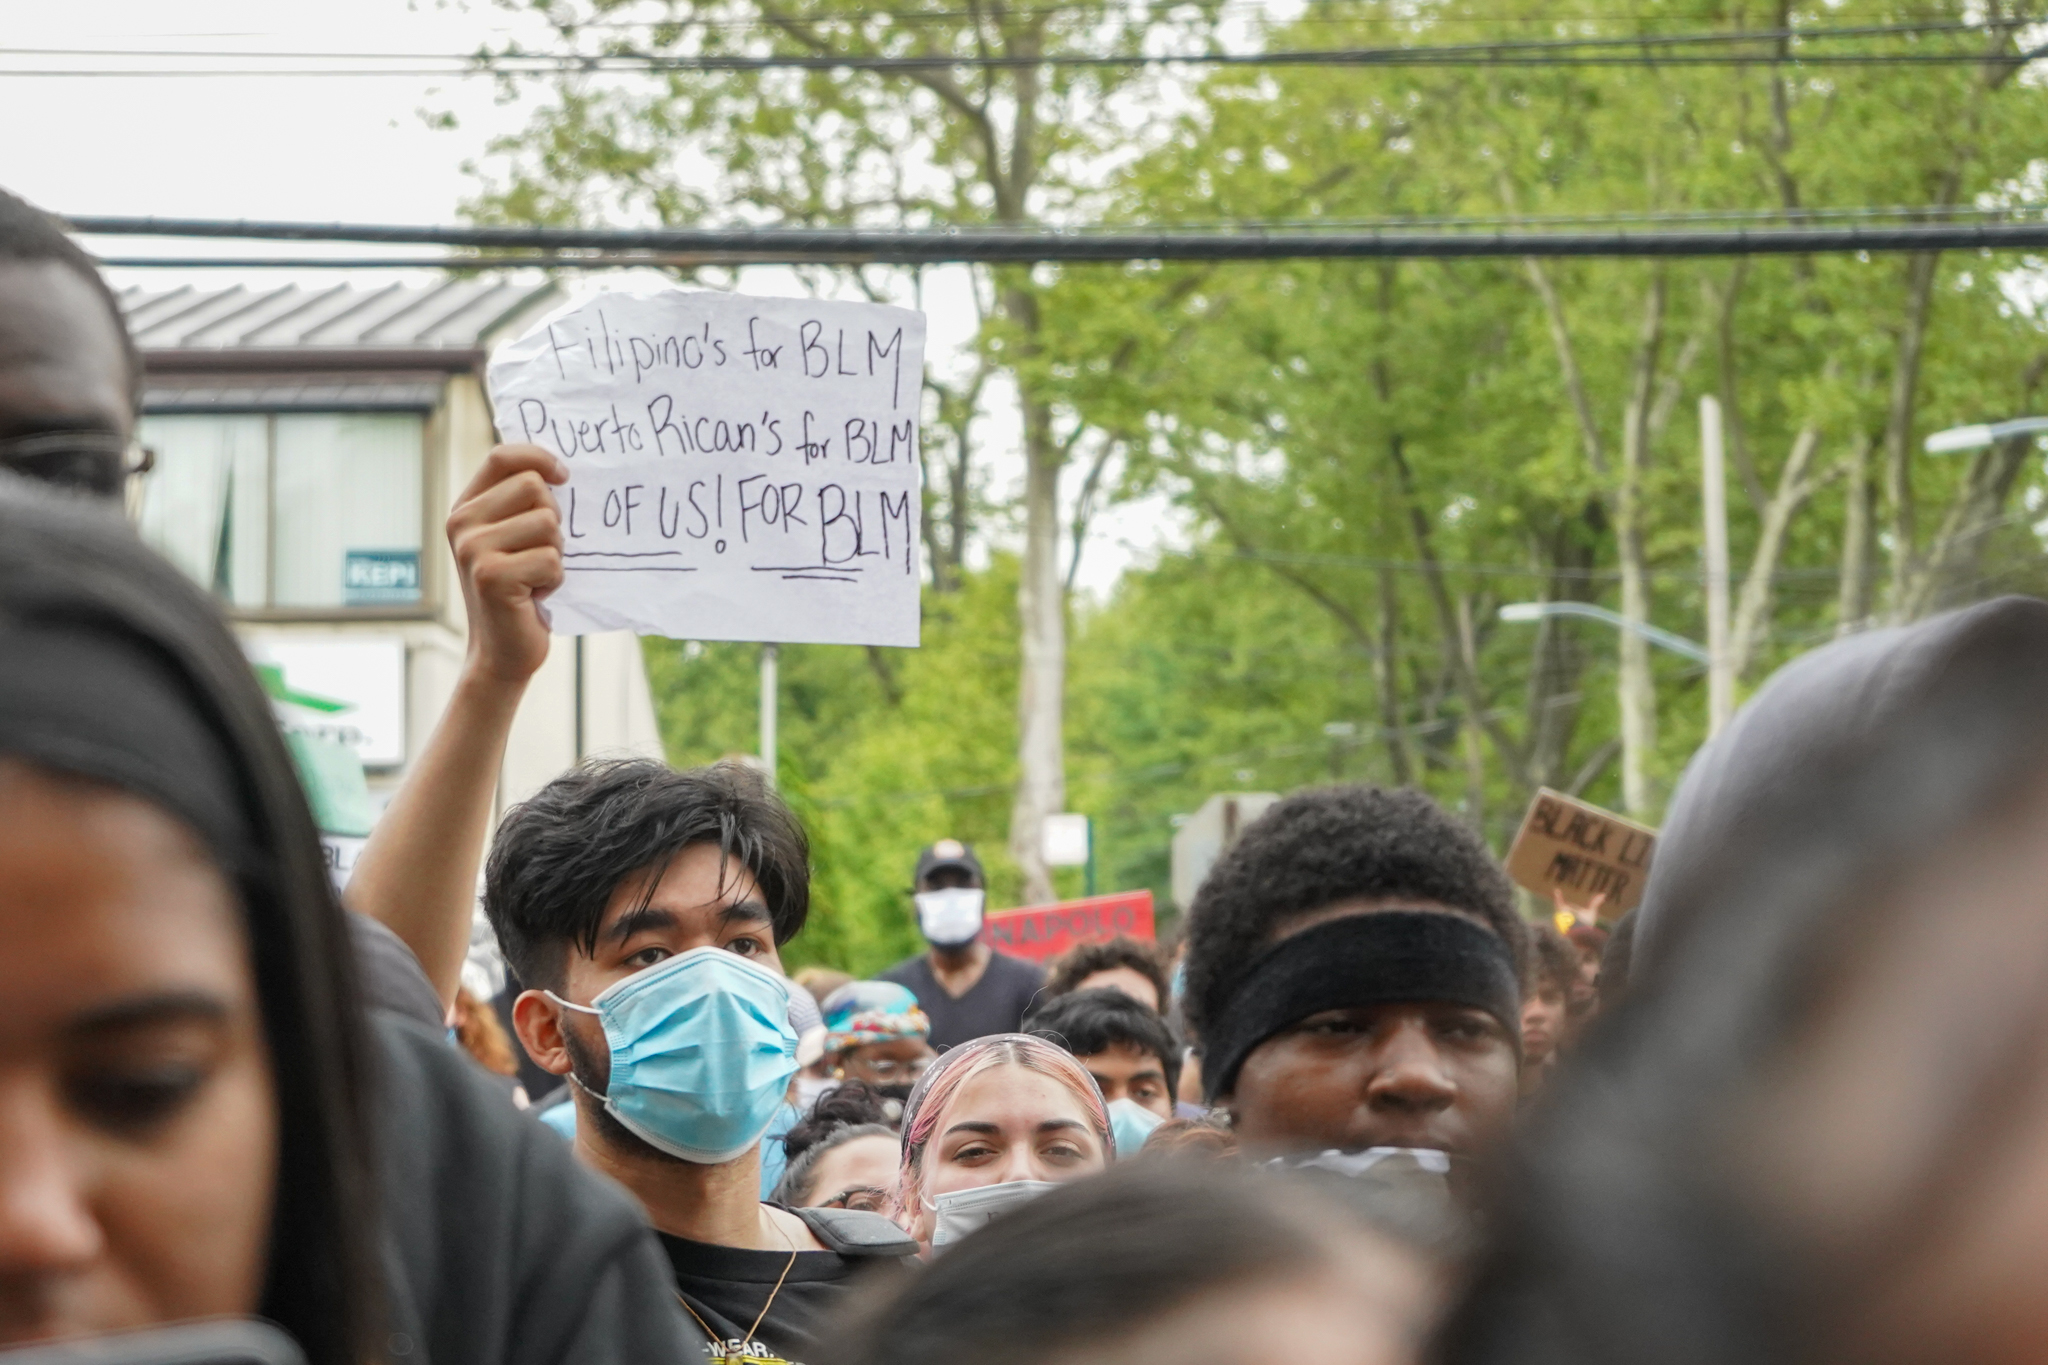 A peaceful protest called for action and change at the 122nd Precinct station house in New Dorp on Friday, June 5, 2020. (Staten Island Advance/Alexandra Salmieri)